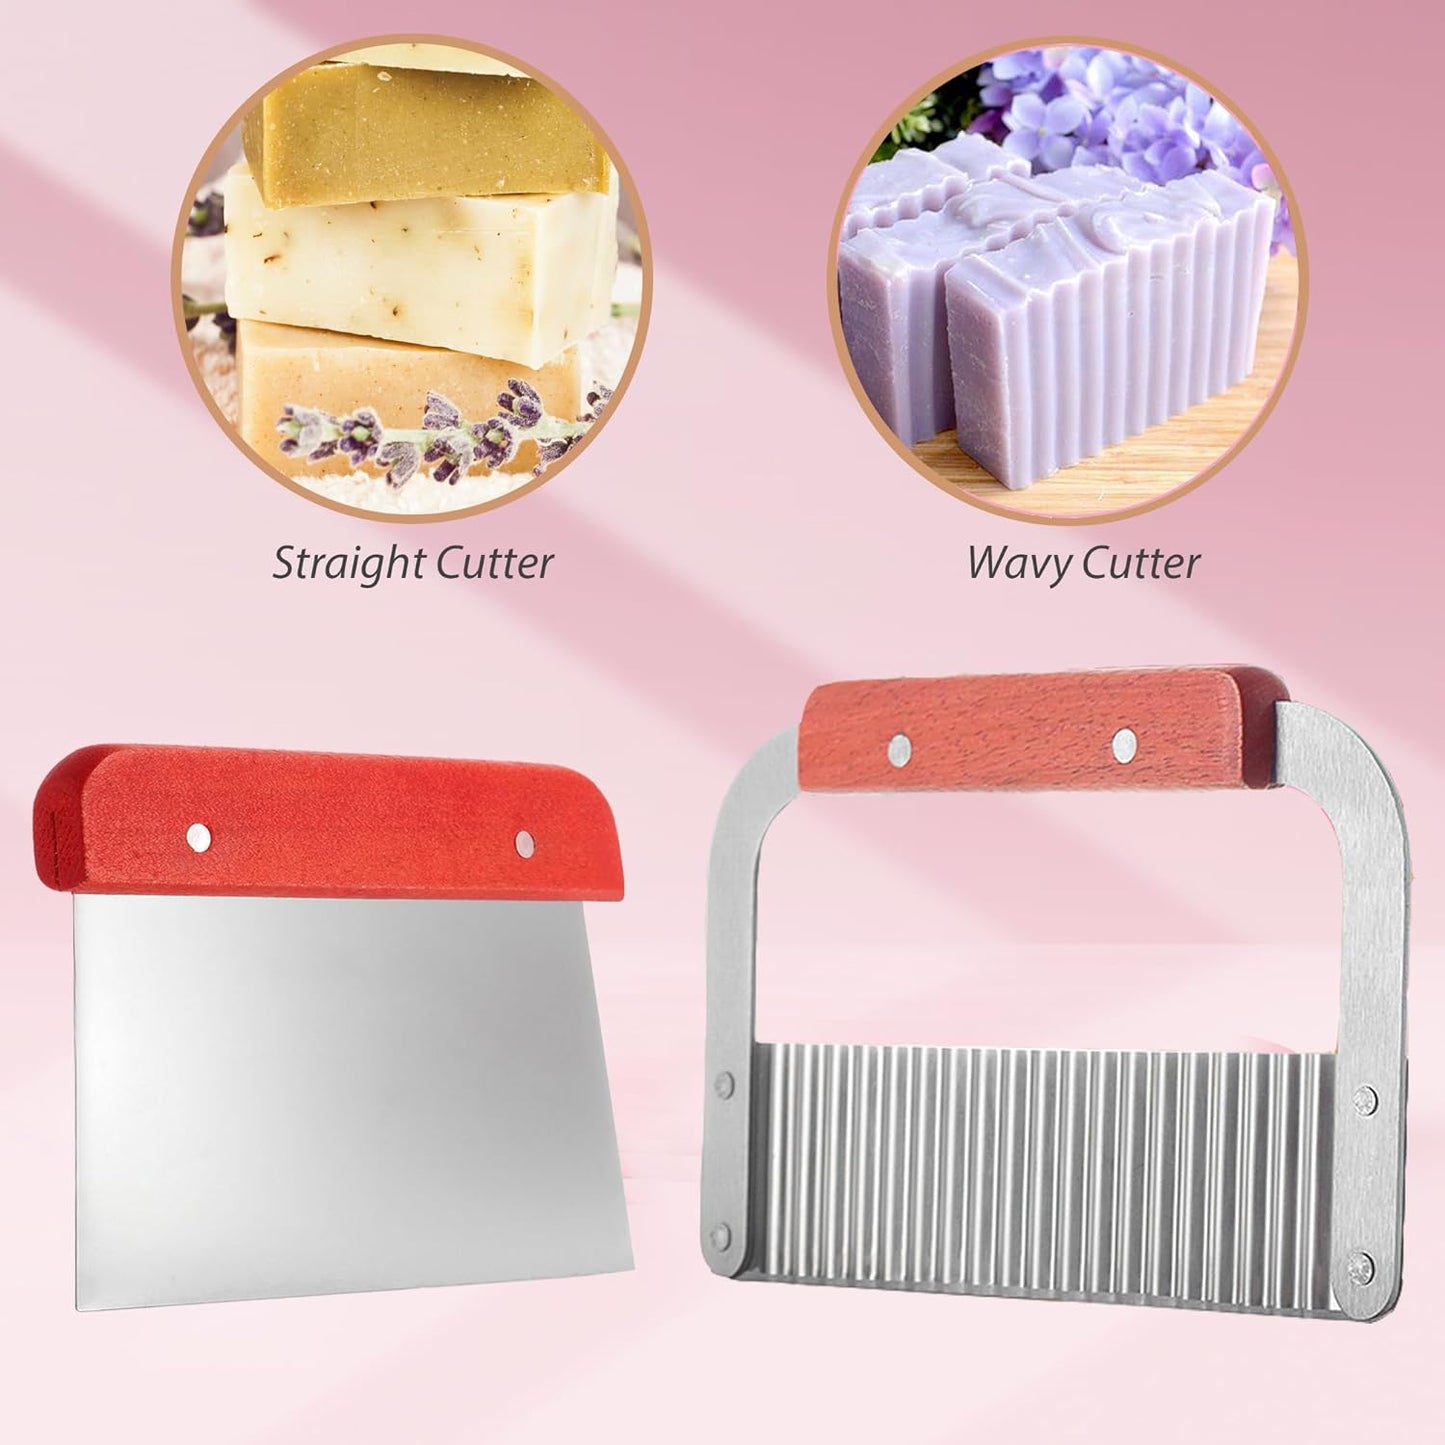 Soap Making Supplies with Soap Cutter, Silicone Mold with Wooden Box, Wavy and Straight Scraper, Personalized Labels and Plastic Bags